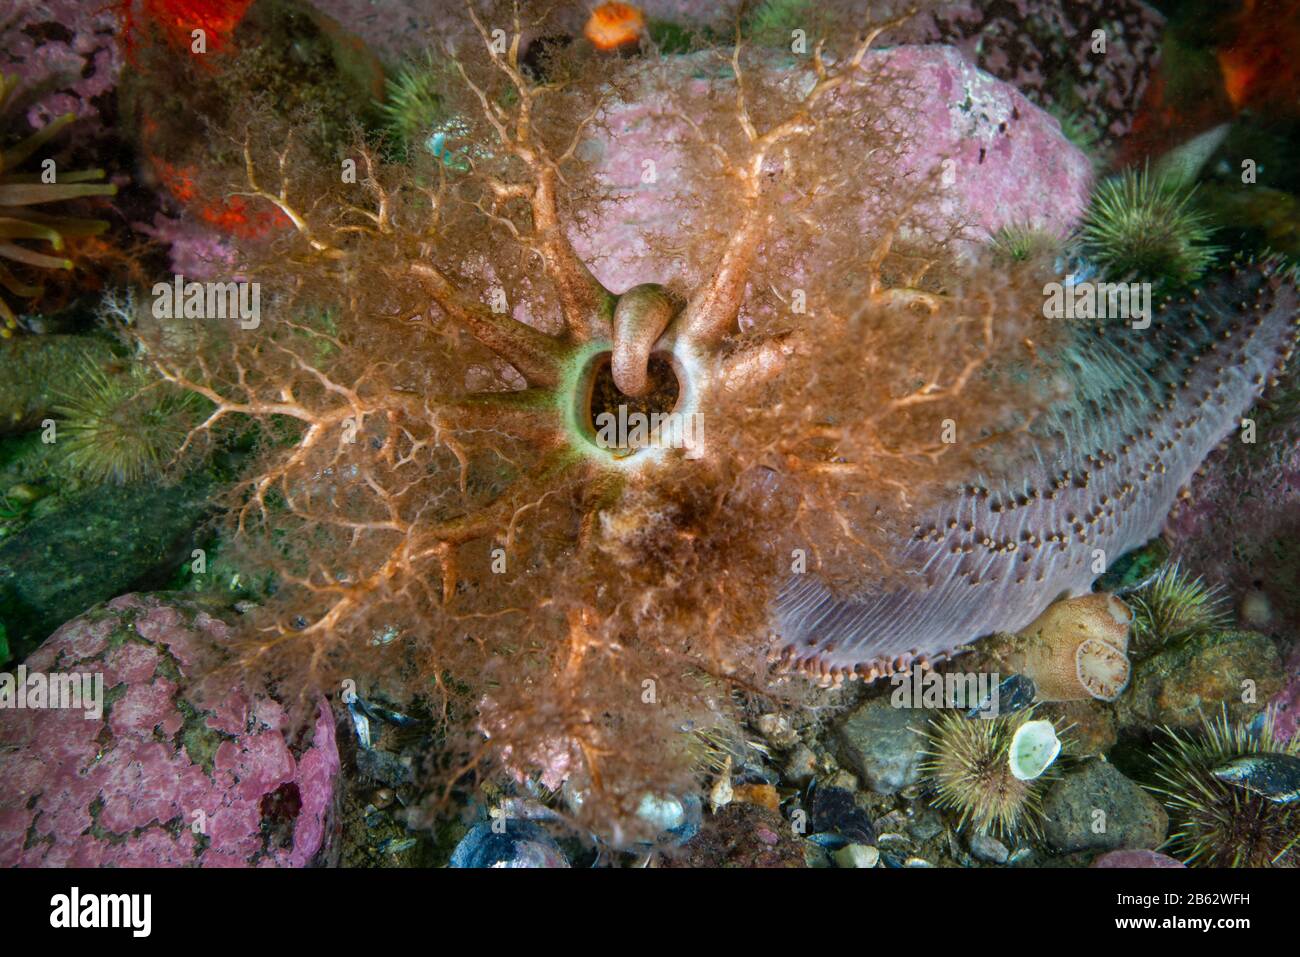 Orange Footed Sea Cucumber underwater in the St. Lawrence River Stock Photo